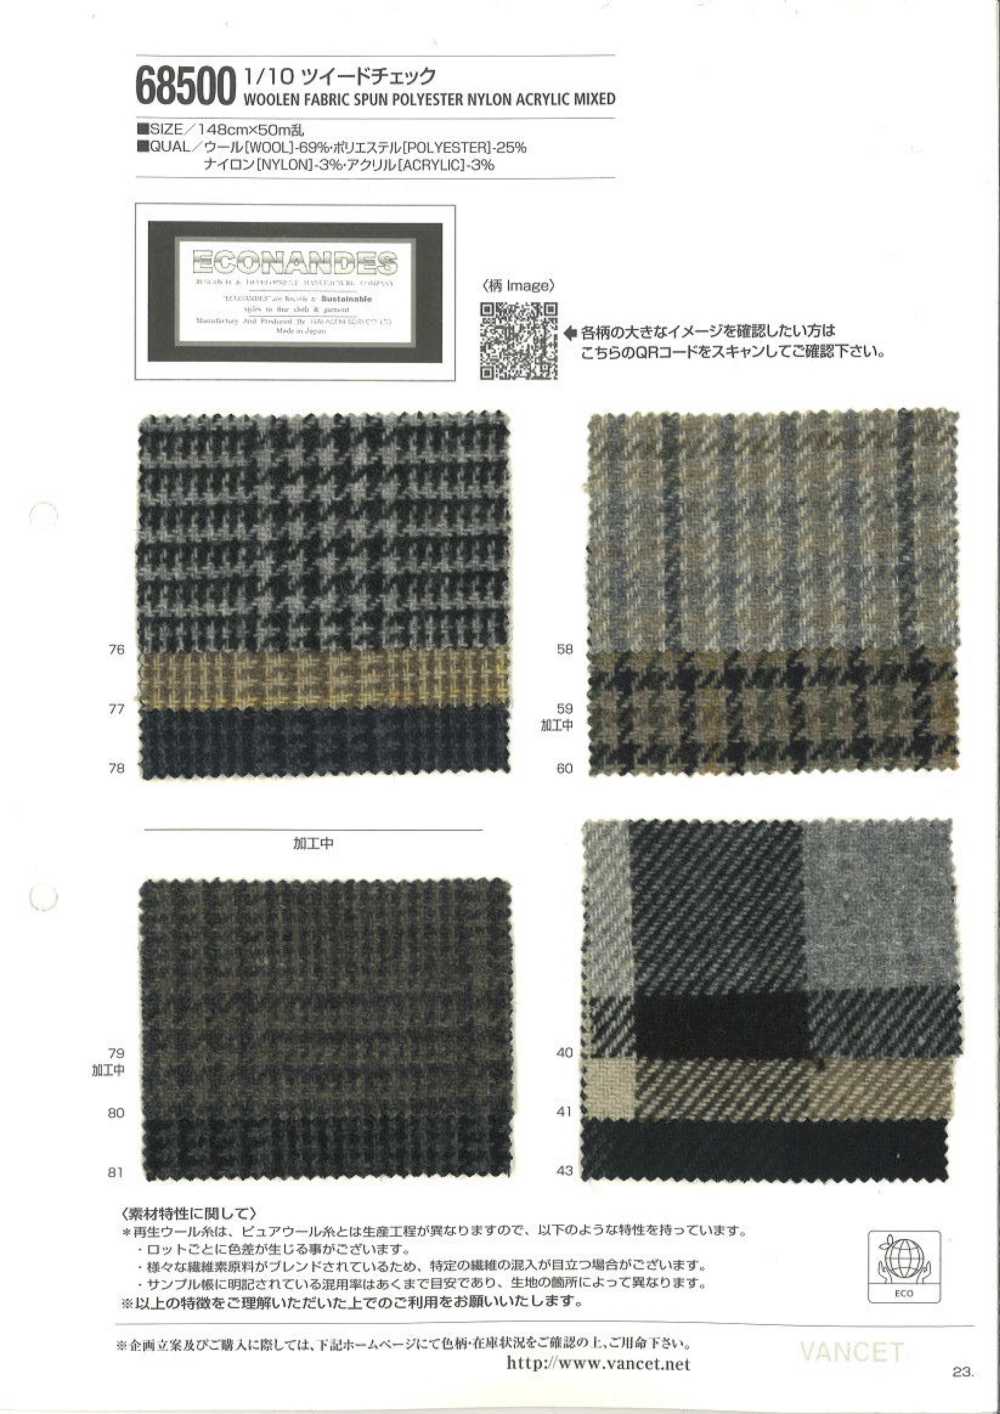 68500 1/10 Tweed Check [using Recycled Wool Thread][Textile / Fabric] VANCET